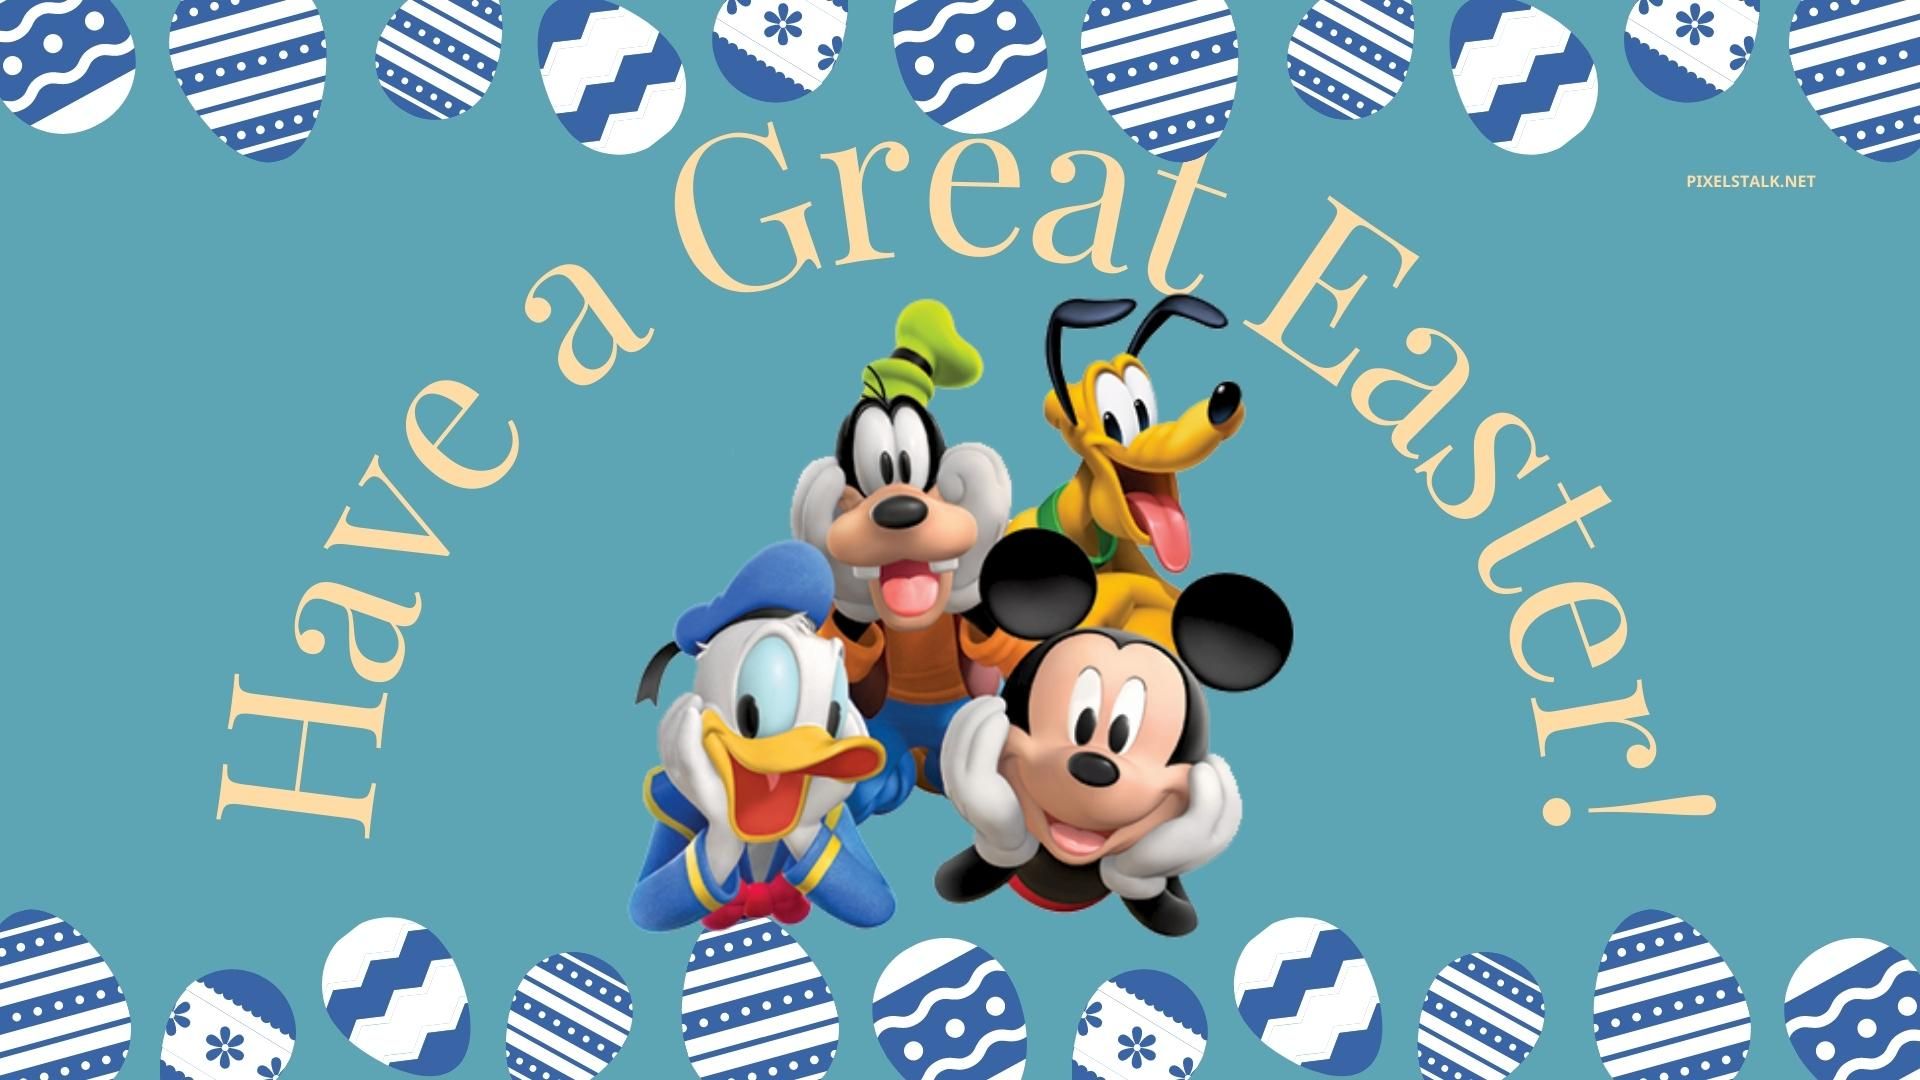 Have a great easter - Mickey Mouse